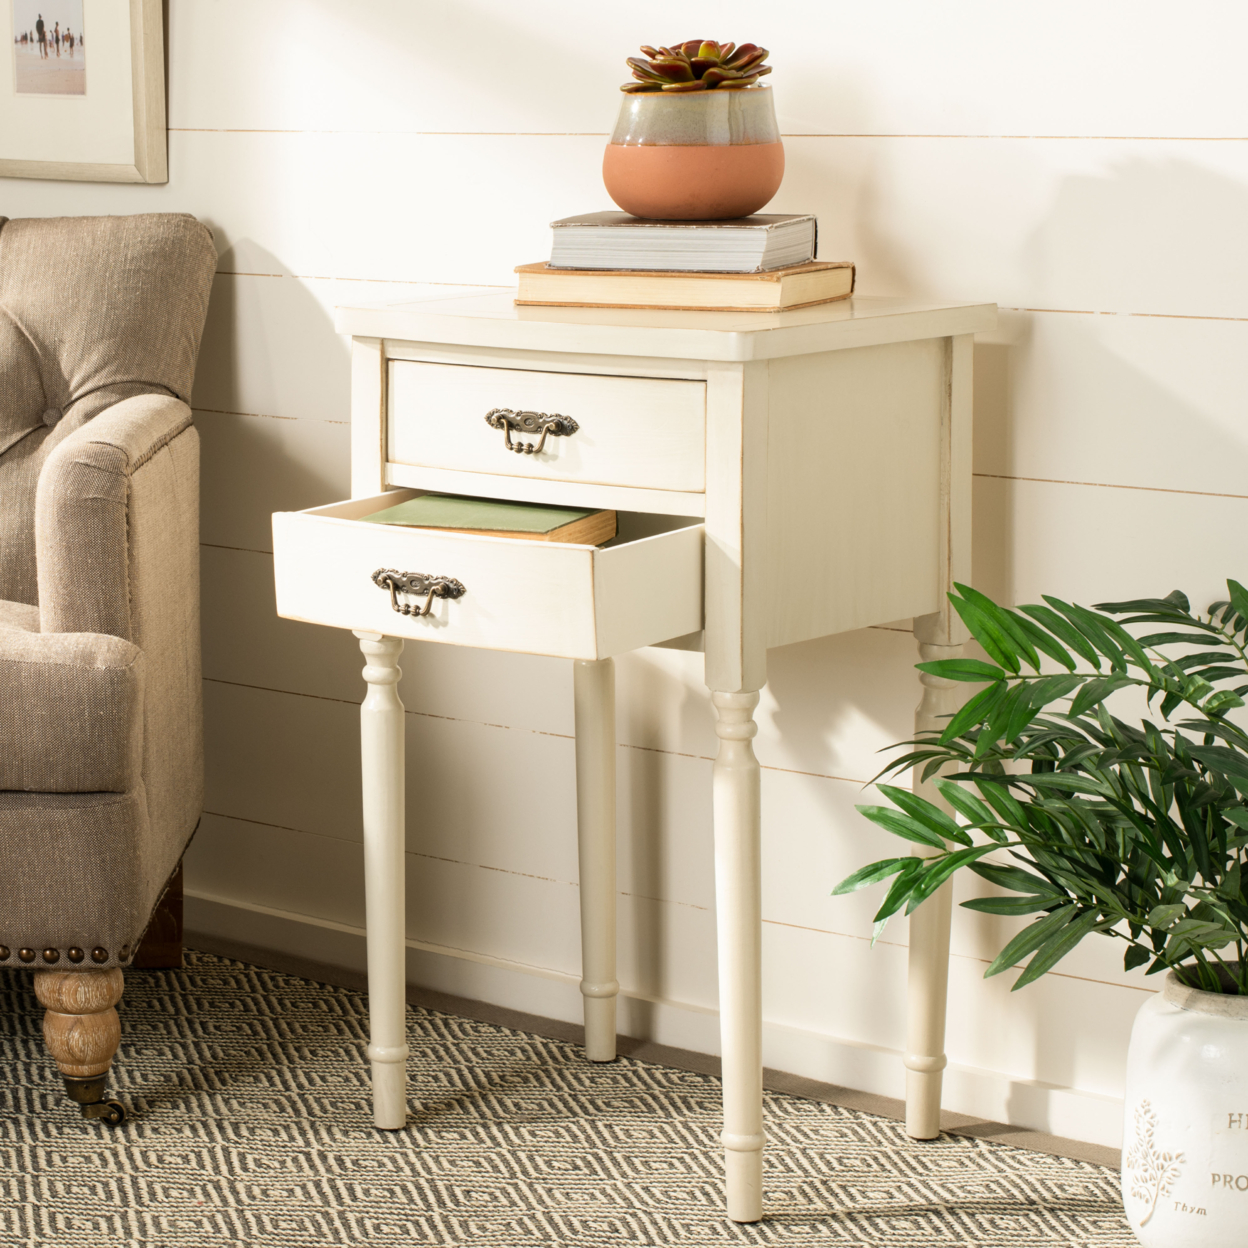 SAFAVIEH Marilyn End Table With Storage Drawers White Birch